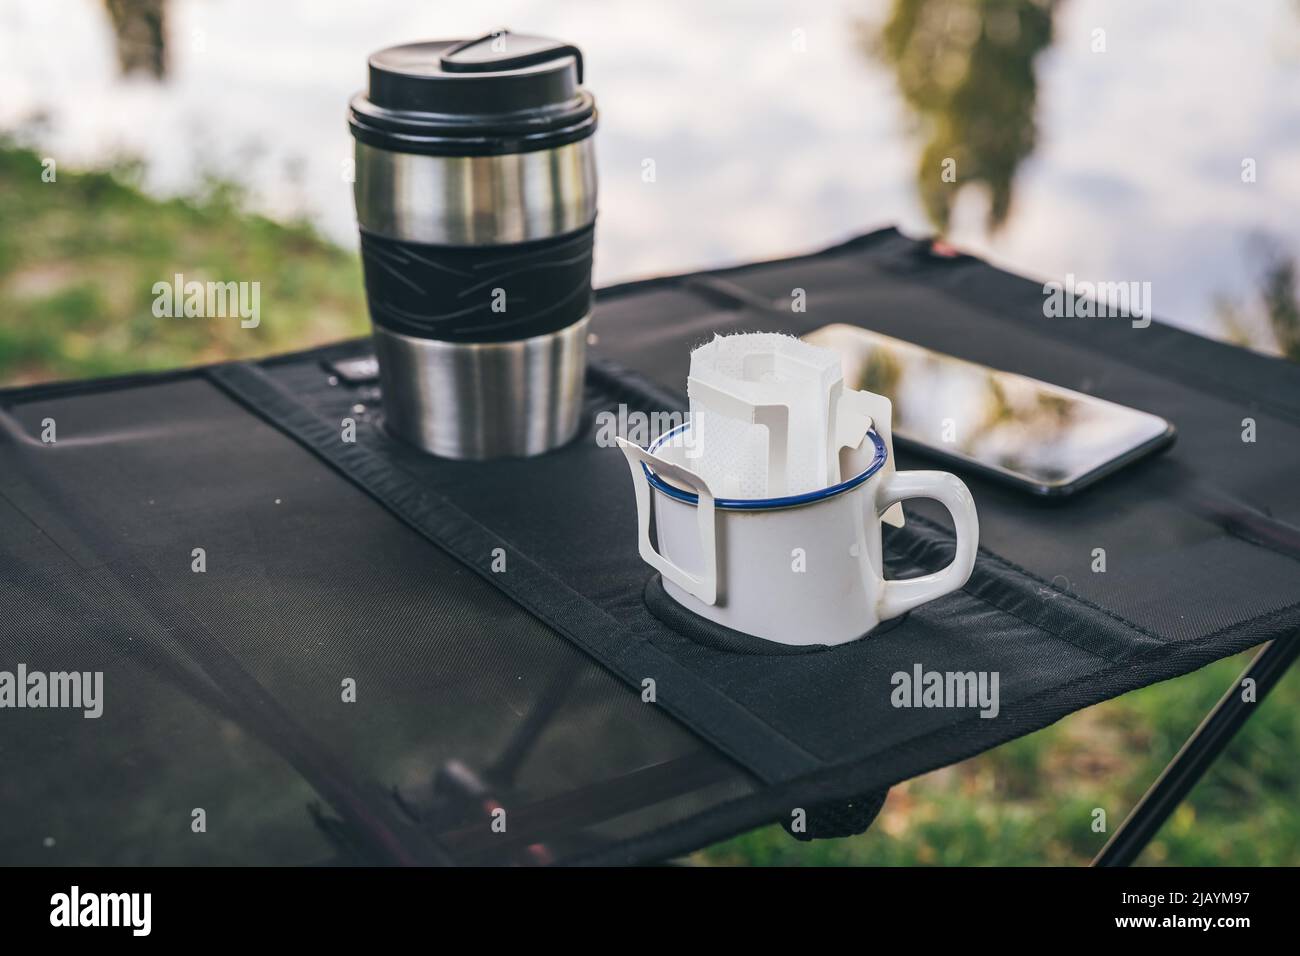 Trendy convenient paper drip coffee bag in metal cup on camping table outdoors. Making freshly brewed coffee in nature Stock Photo